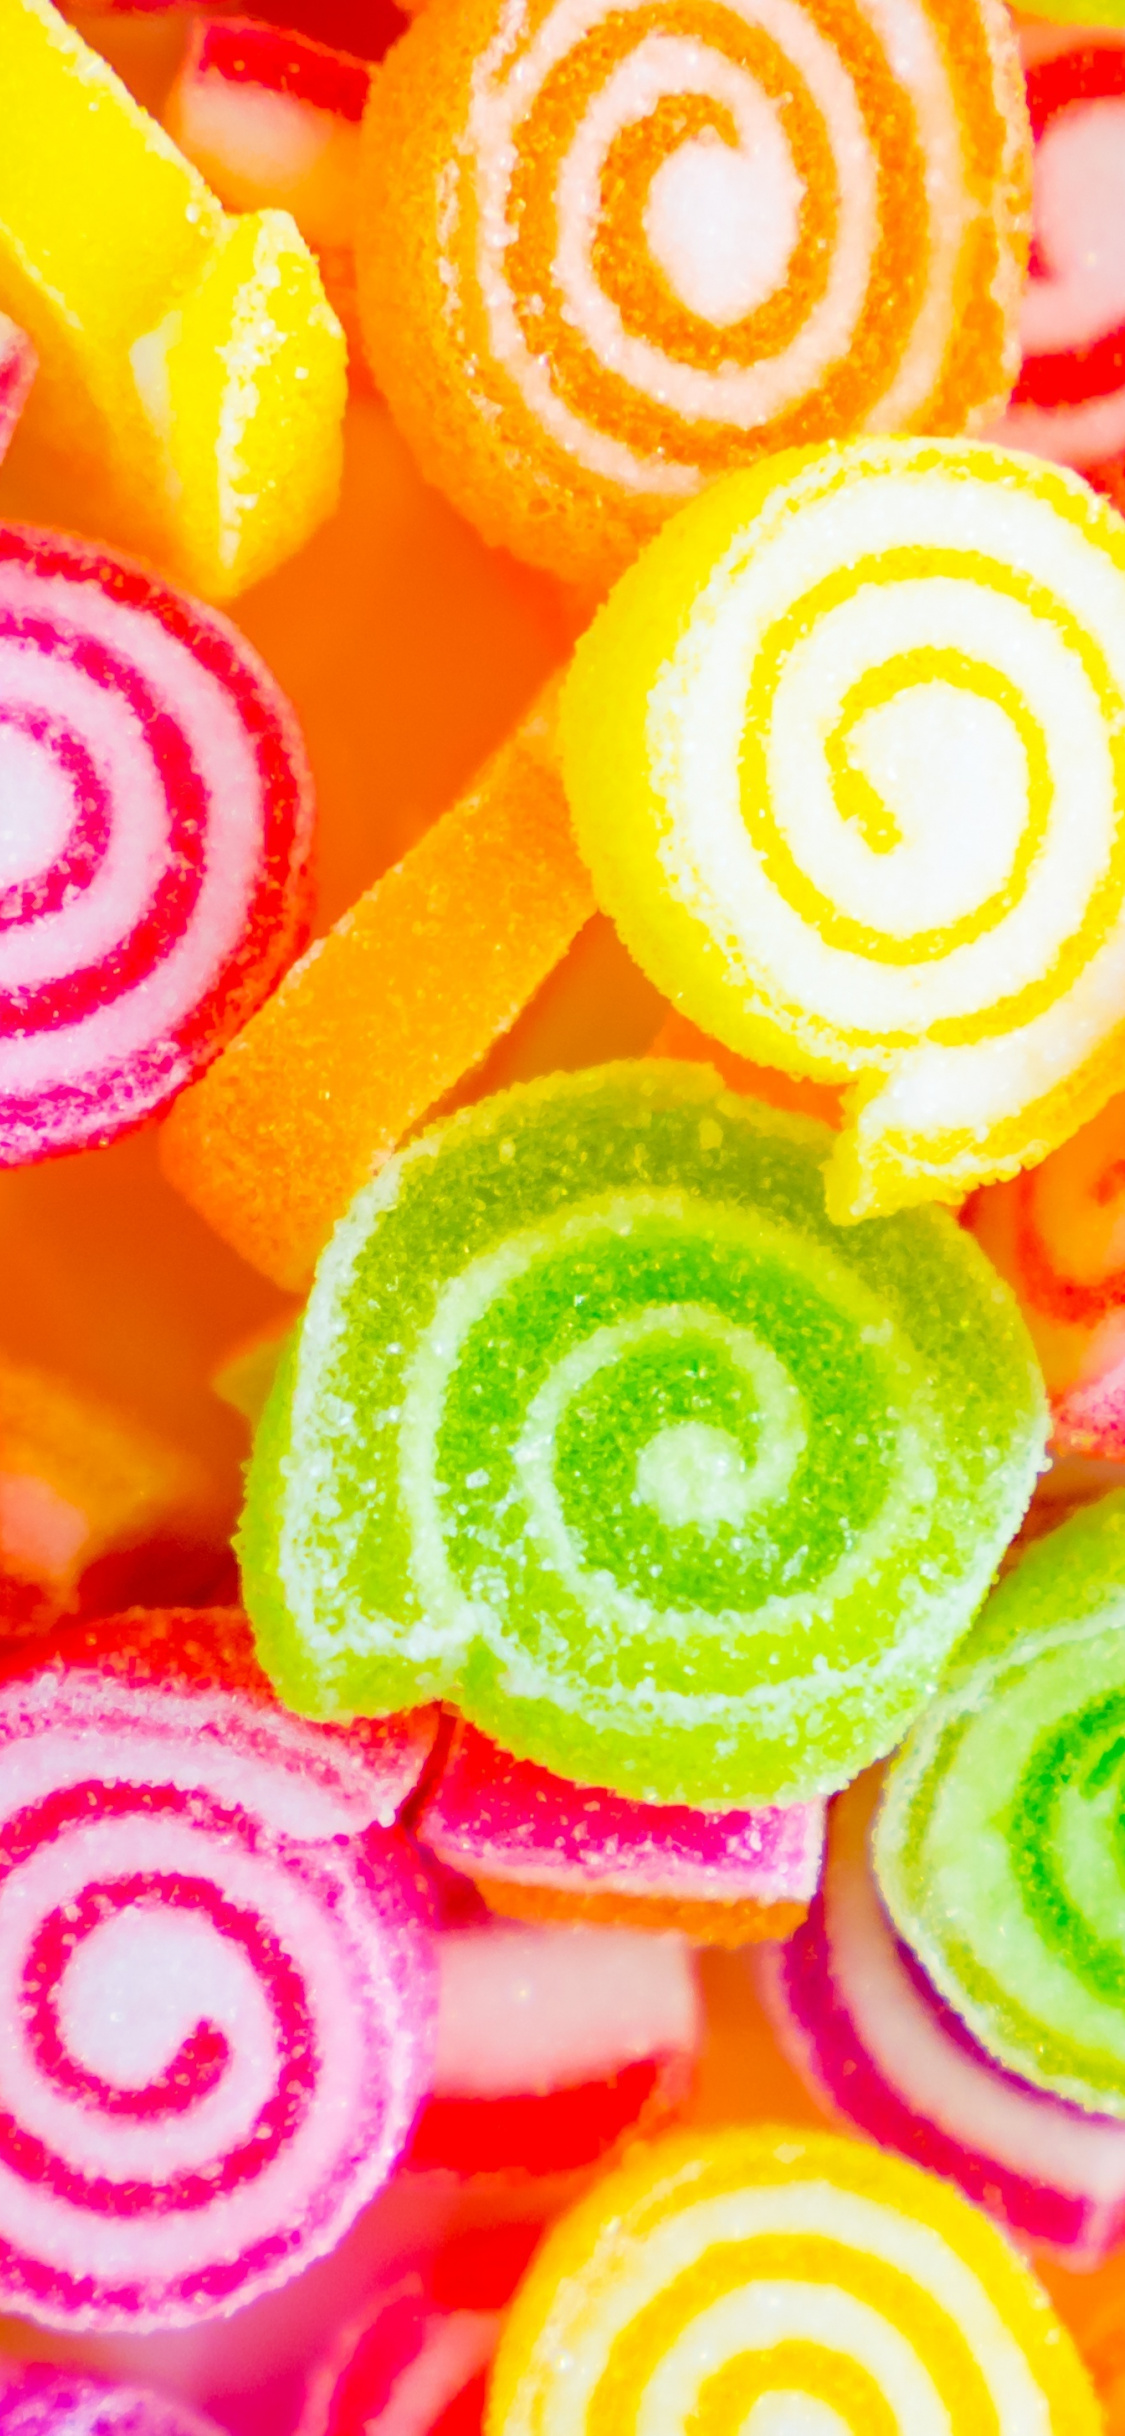 Colorful, Candies, Sweet Rolles, Wallpaper - Candy Wallpaper Hd Iphone - HD Wallpaper 